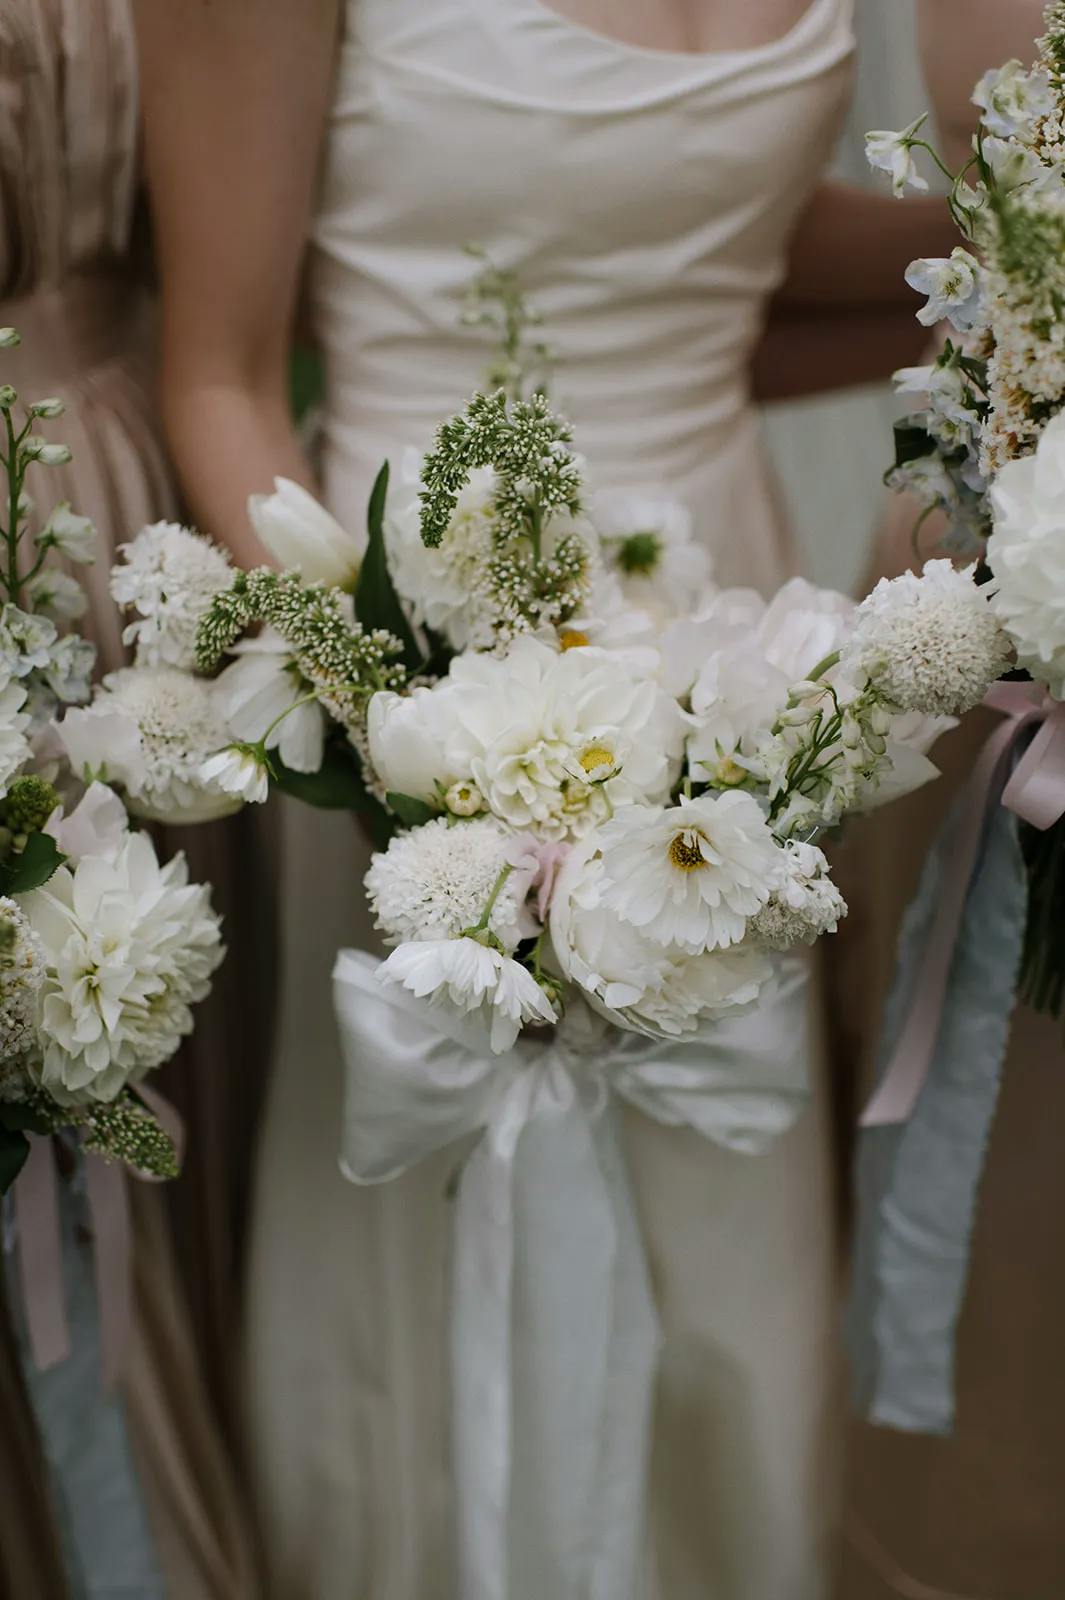 Three people in formal attire are holding floral bouquets. The central bouquet features white flowers with greenery, adorned with a white ribbon. The background is out of focus, highlighting the elegant and delicate arrangement of the flowers.